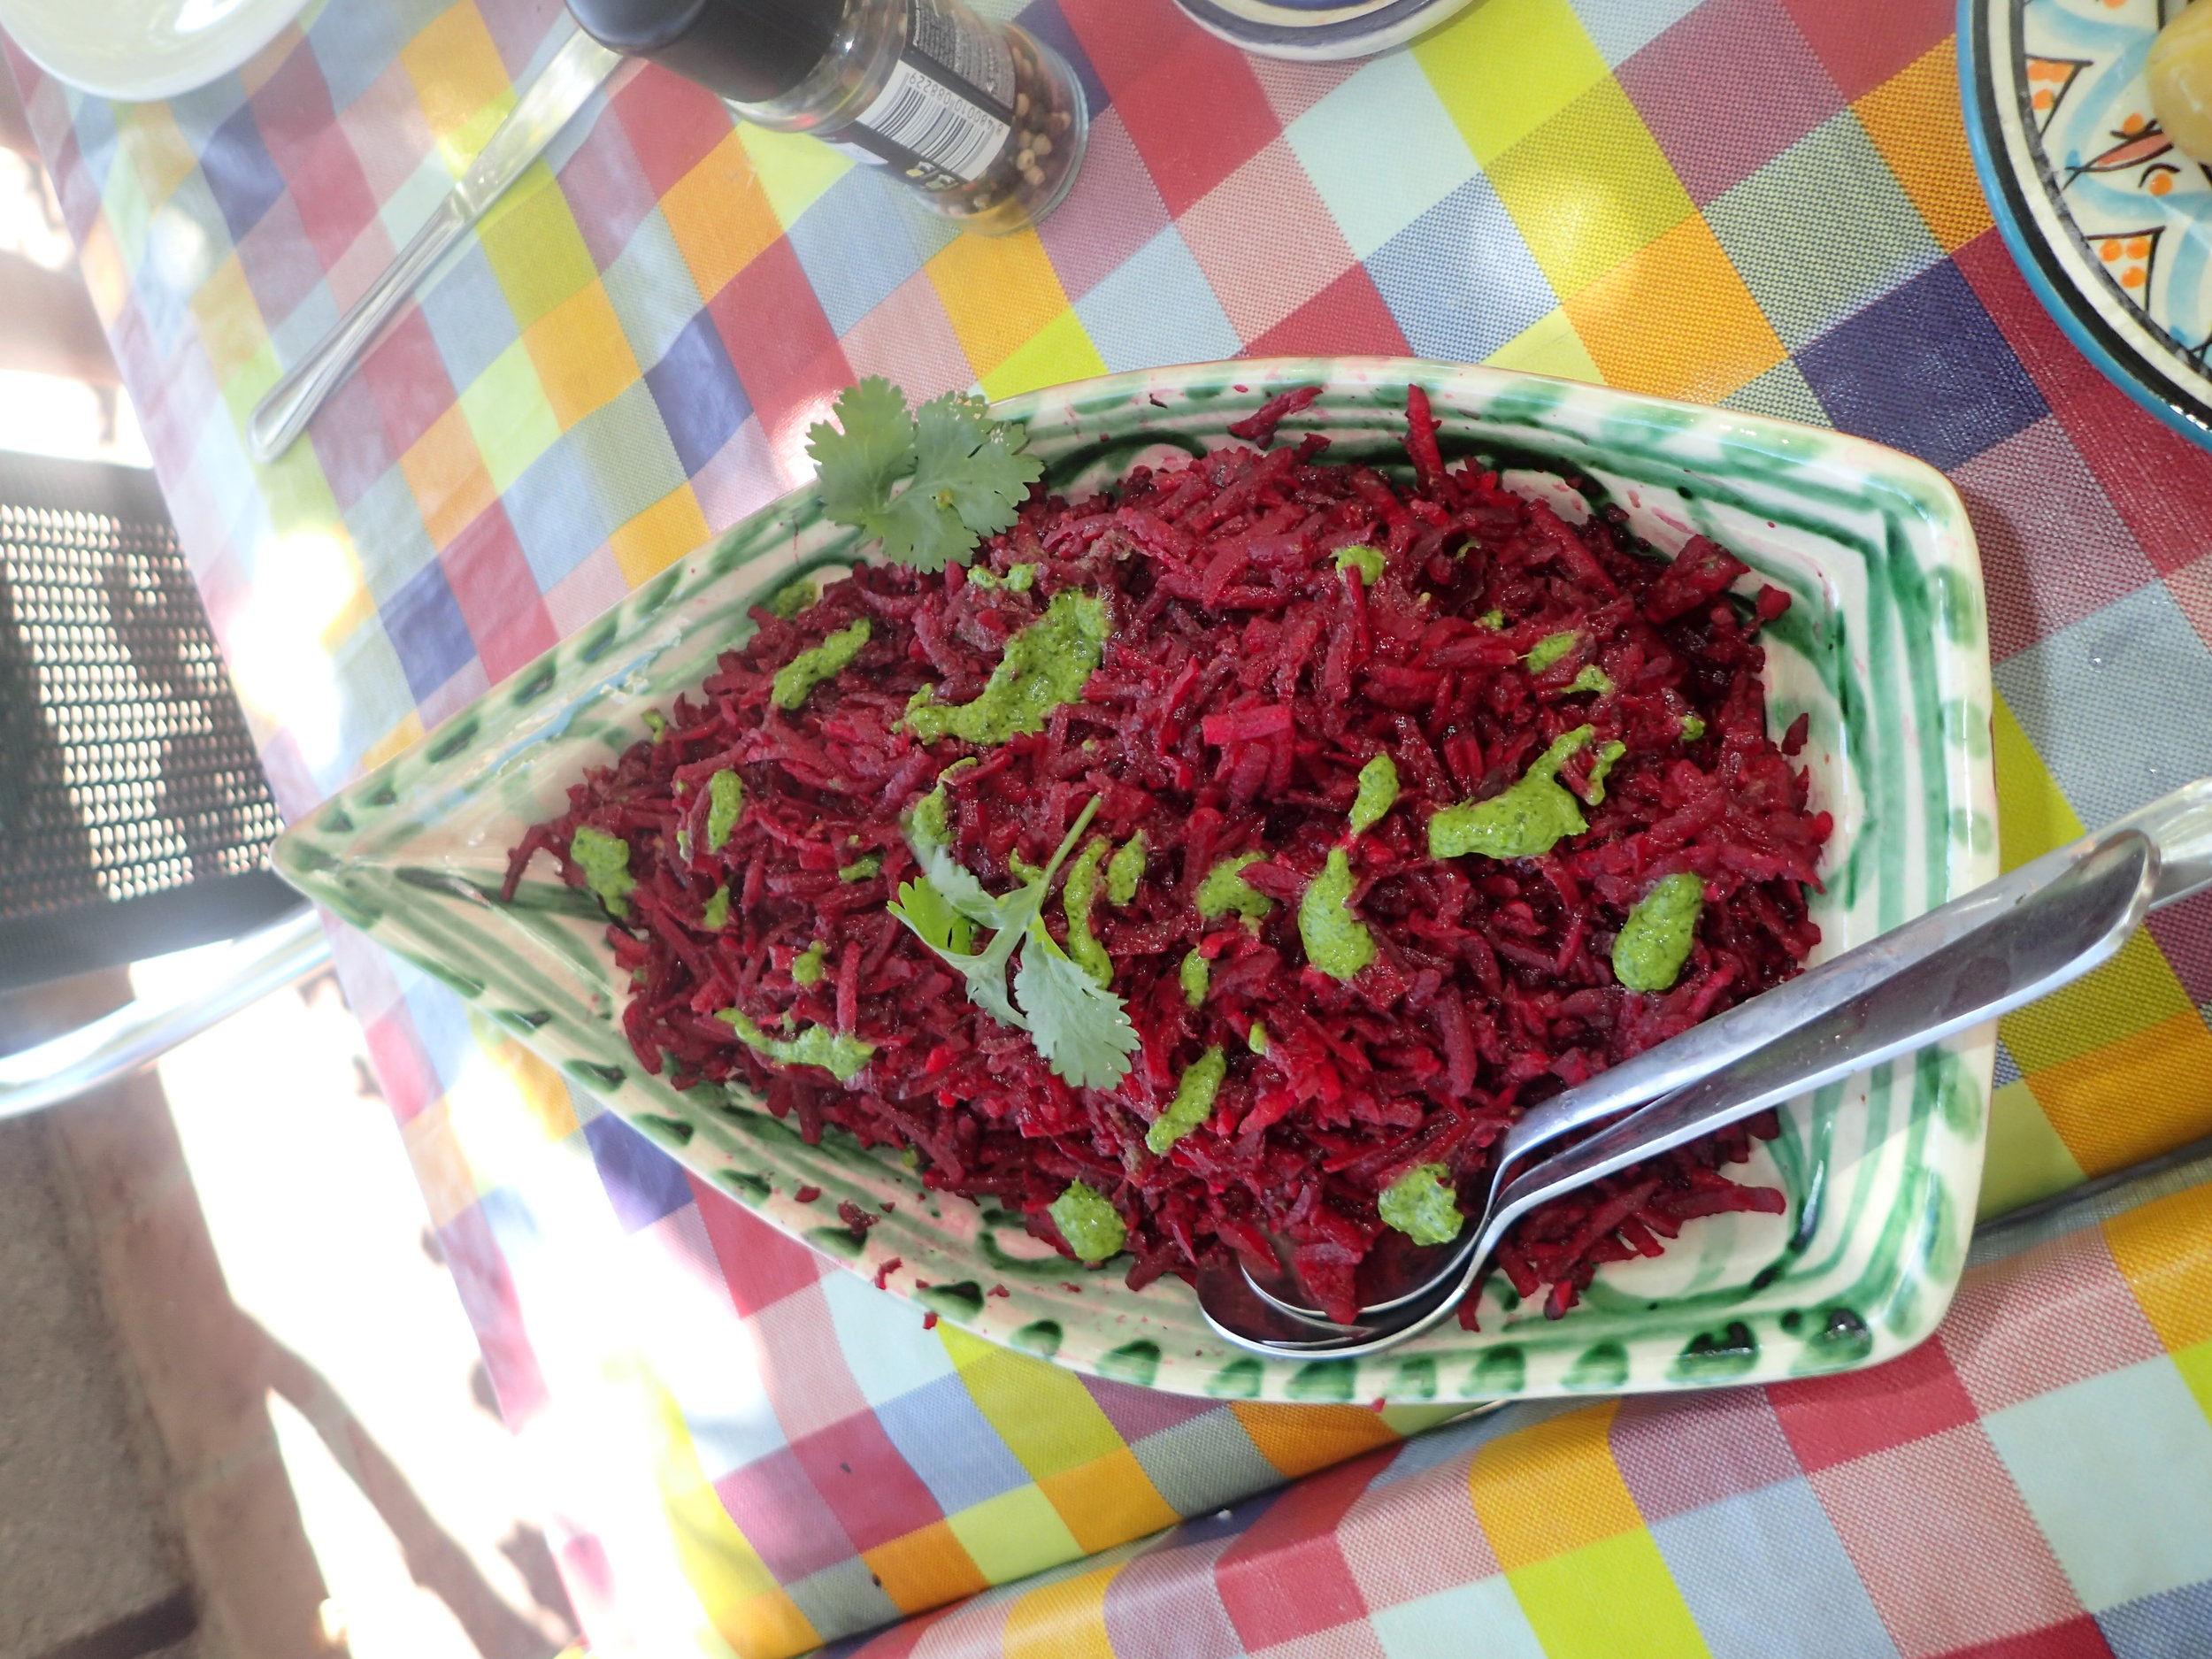 Beet salad at Yin Yang Yoga retreat in the Malaga mountains in Spain with Jane Bakx Yoga